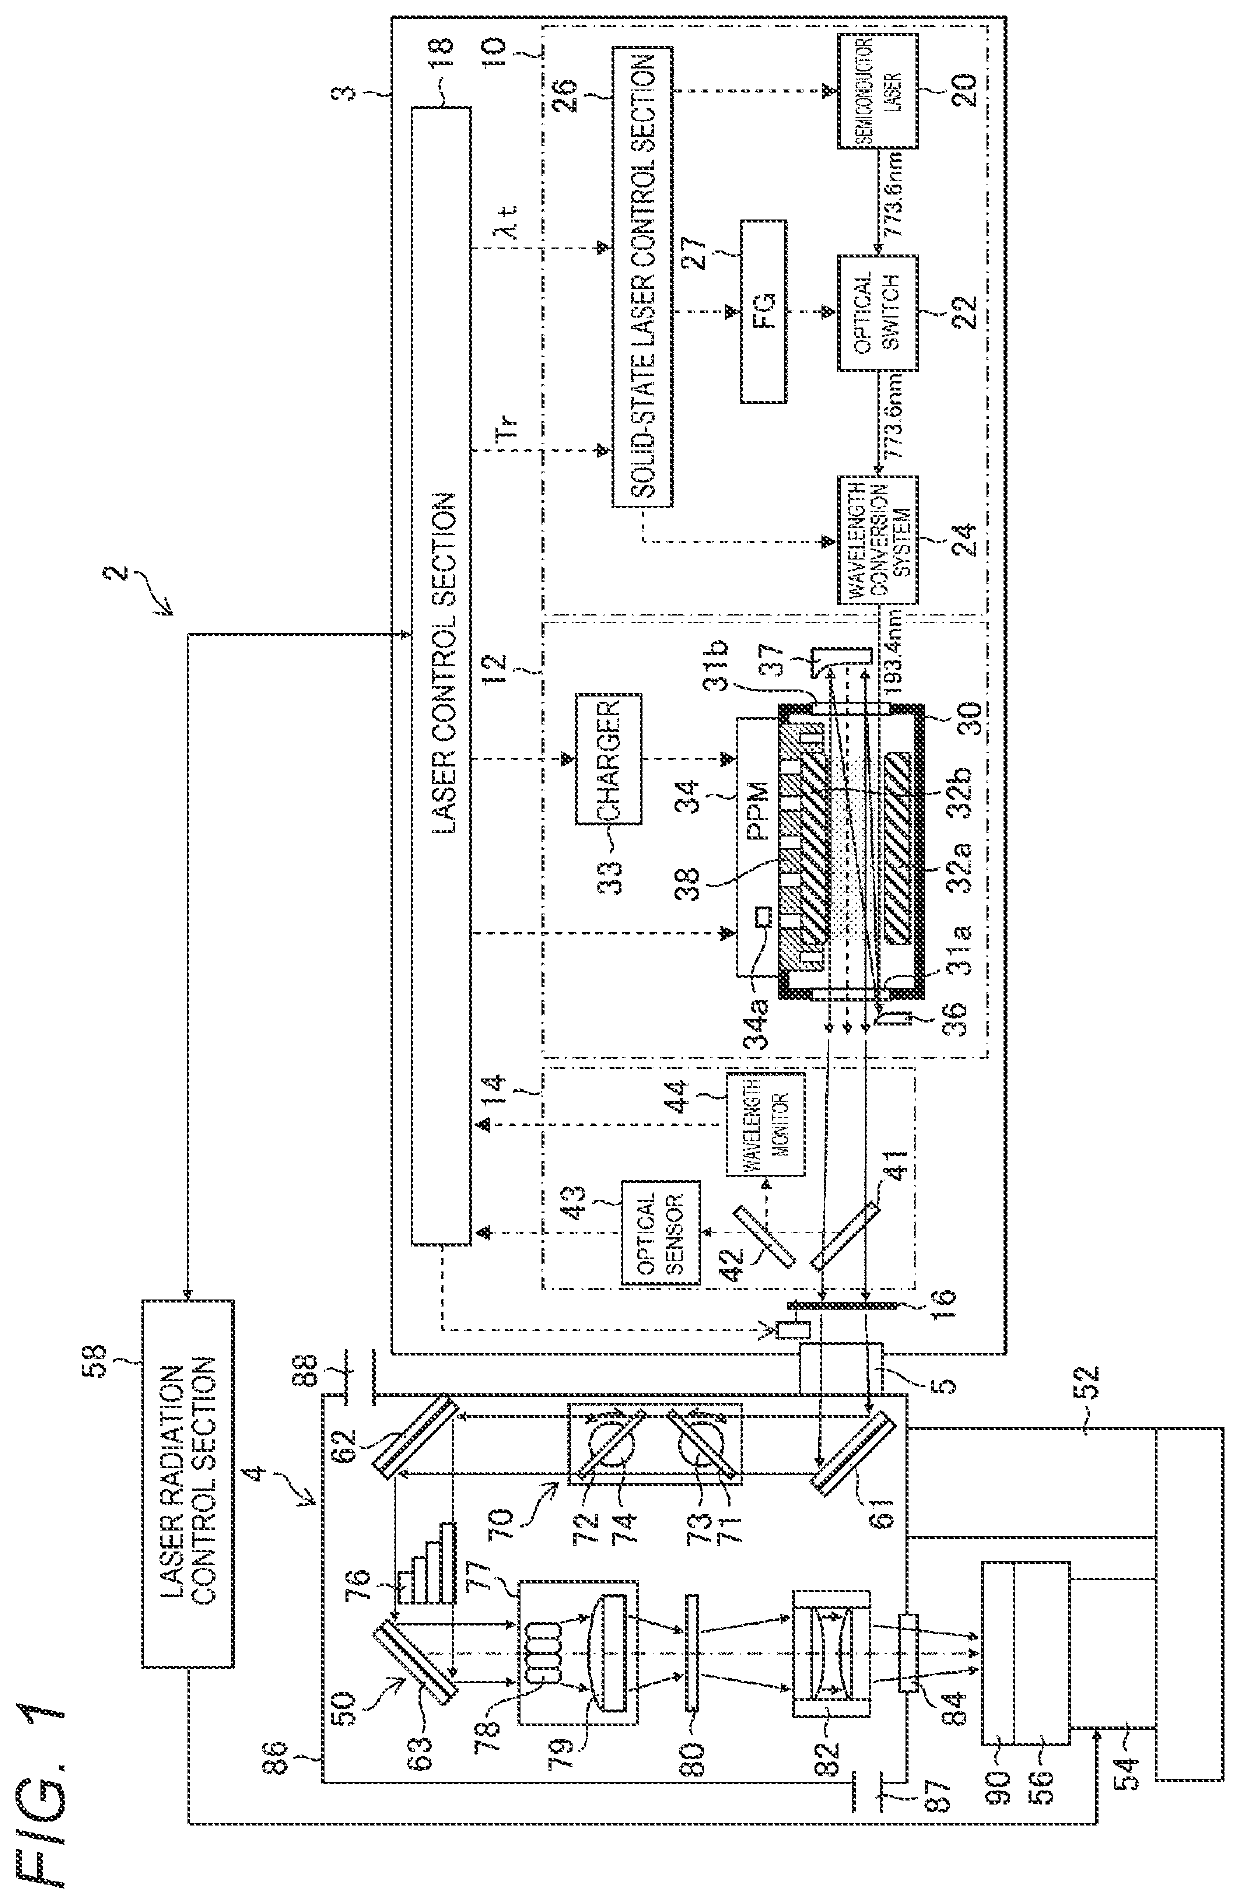 Laser apparatus, laser processing system, and method for manufacturing electronic device